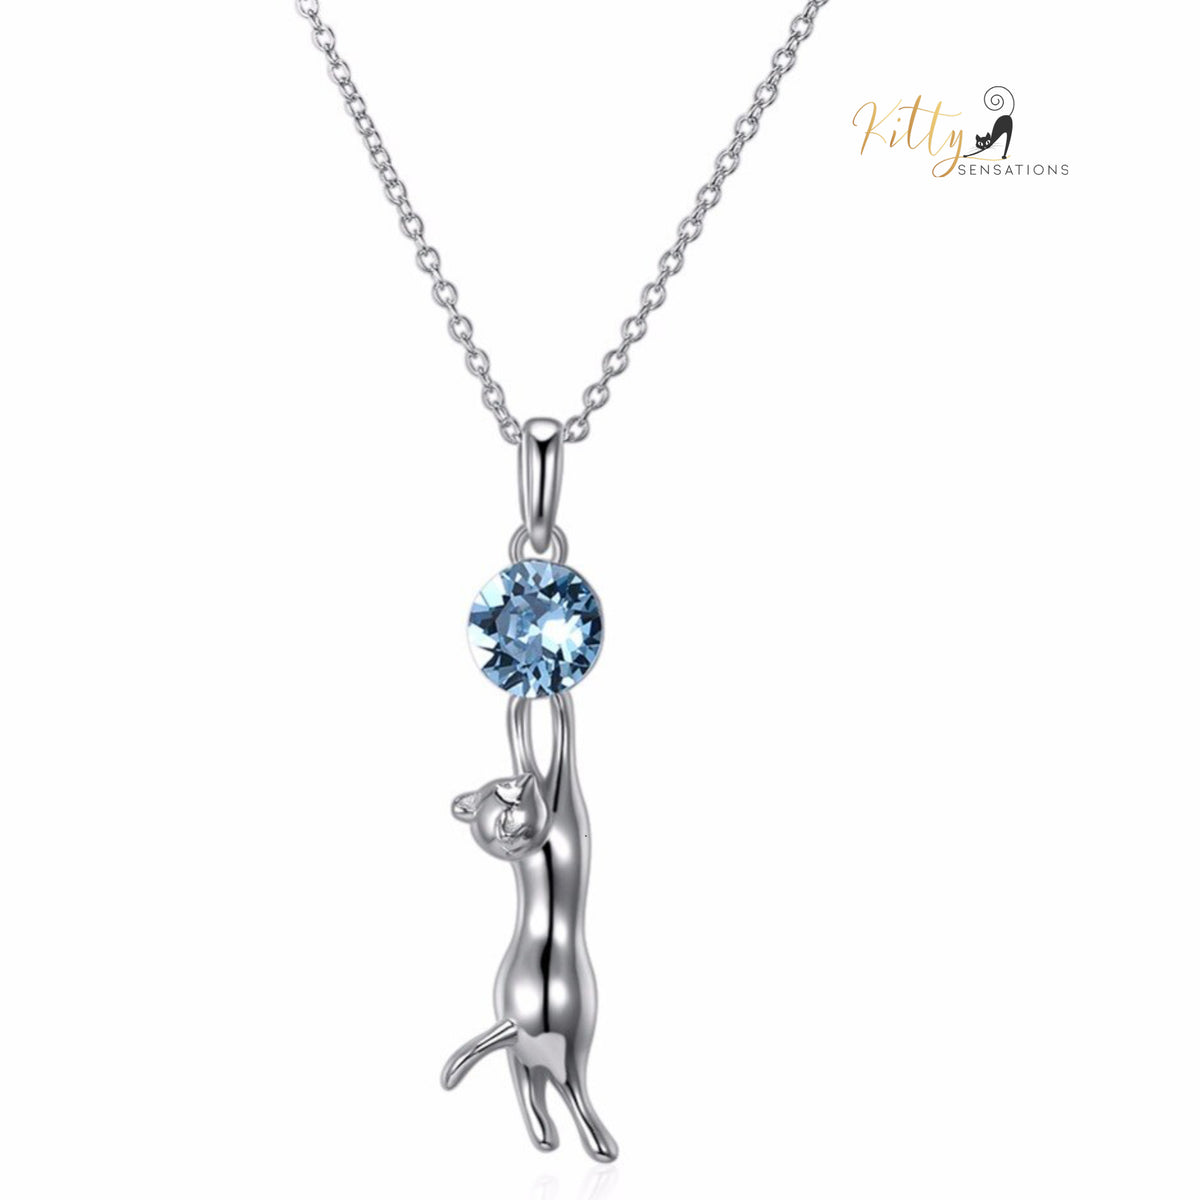 http://KittySensations.com Swarovski Crystal Hanging Cat Necklace in Solid 925 Sterling Silver ($69.48): https://kittysensations.com/products/hanging-cat-necklace-with-swarovski-crystal-in-solid-925-sterling-silver